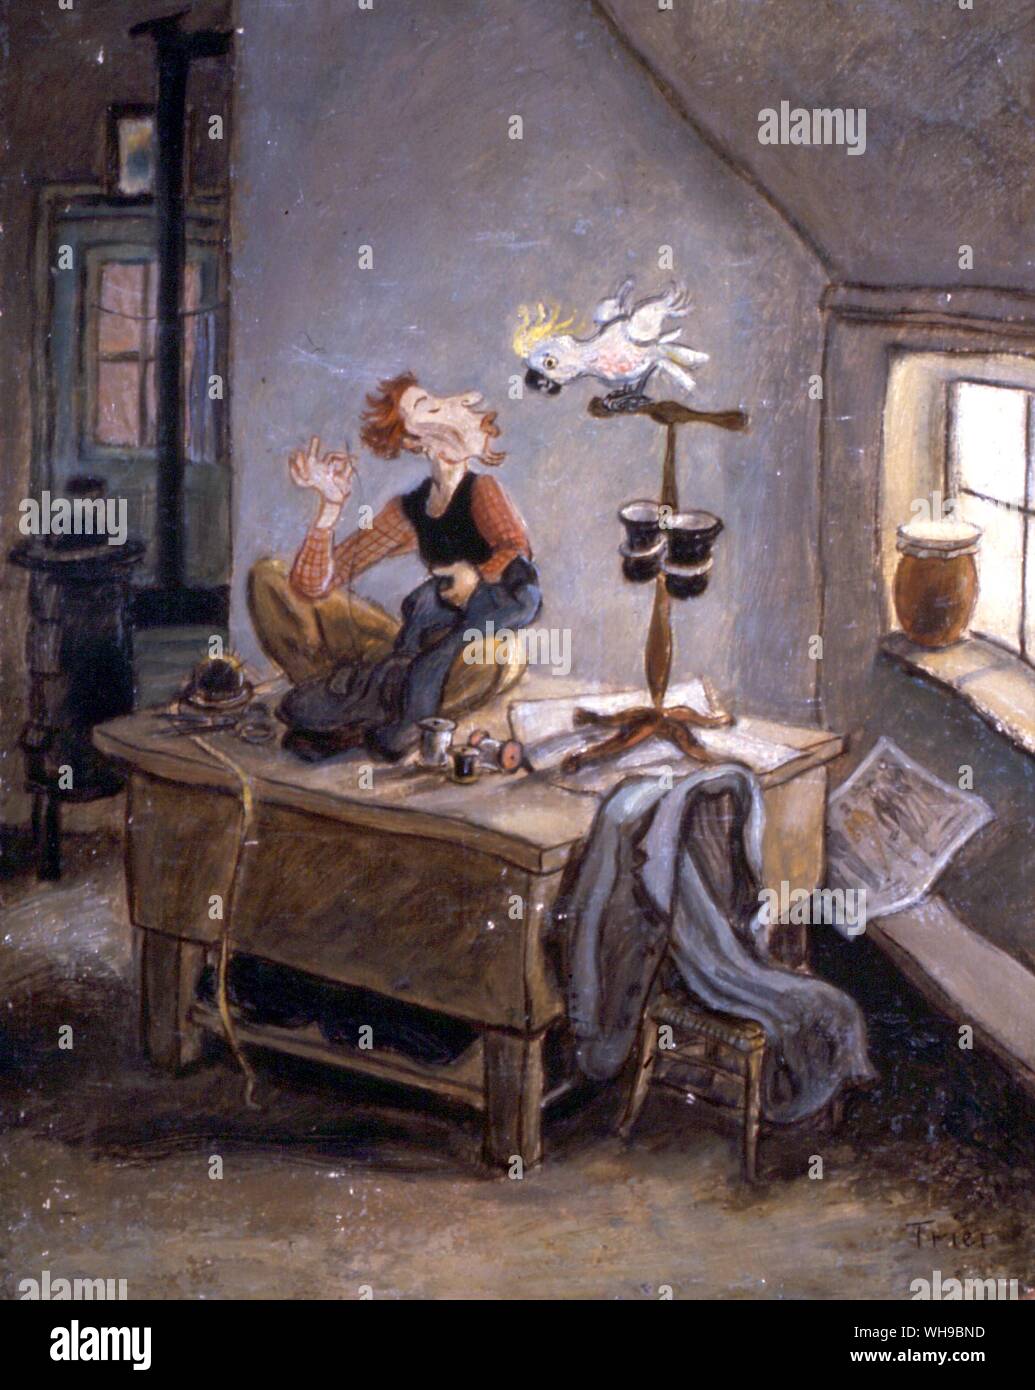 Book illustration of a taylor sewing atop his work bench. Stock Photo